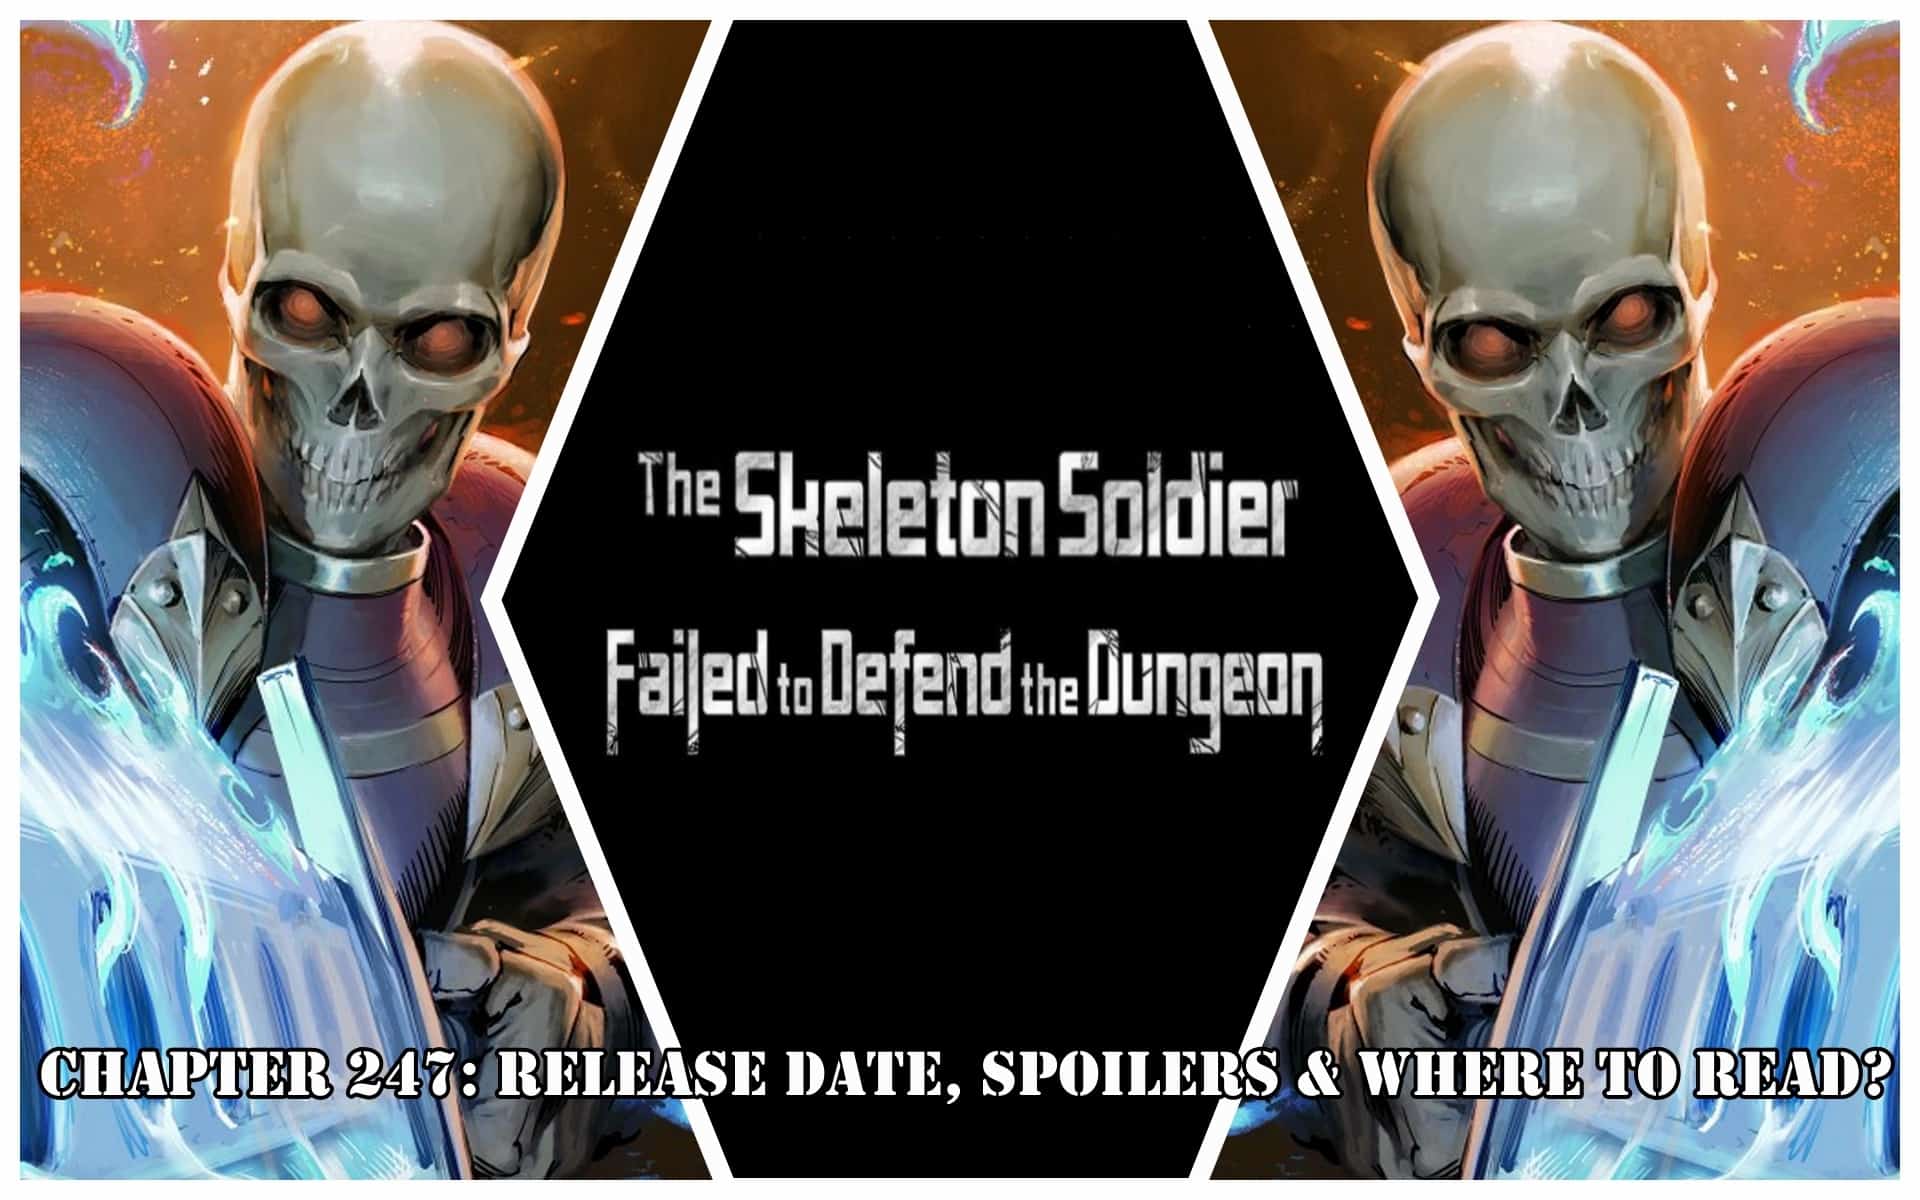 Skeleton Soldier Couldn't Protect the Dungeon Chapter 247: Release Date, Spoilers & Where to Read?